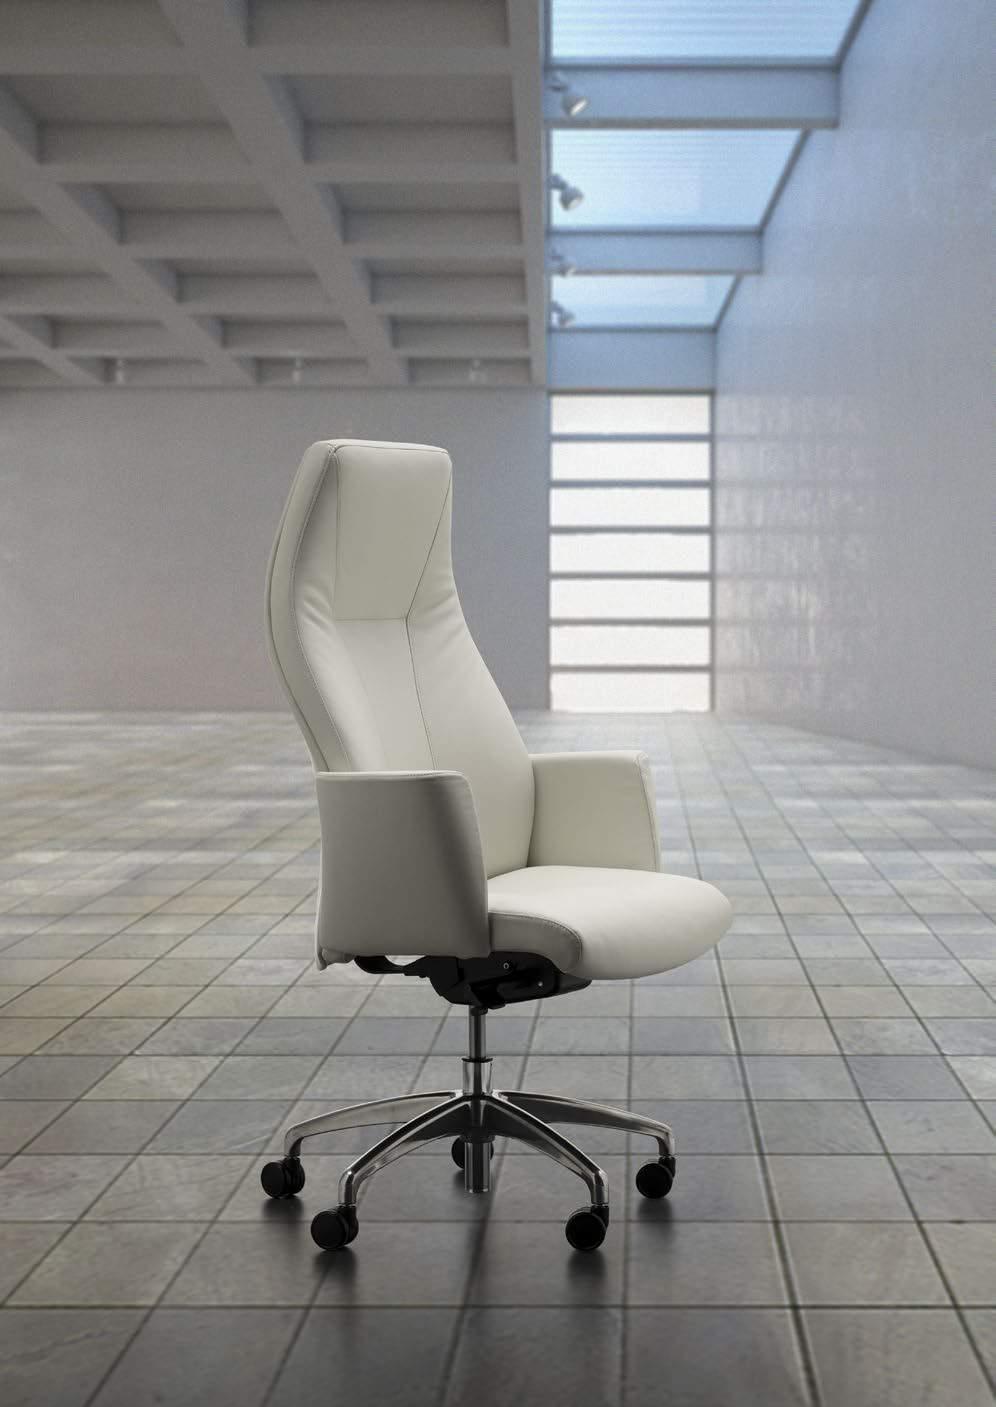 Verve 2 _ Executive seating designed by Verco Verve 2 exudes style,